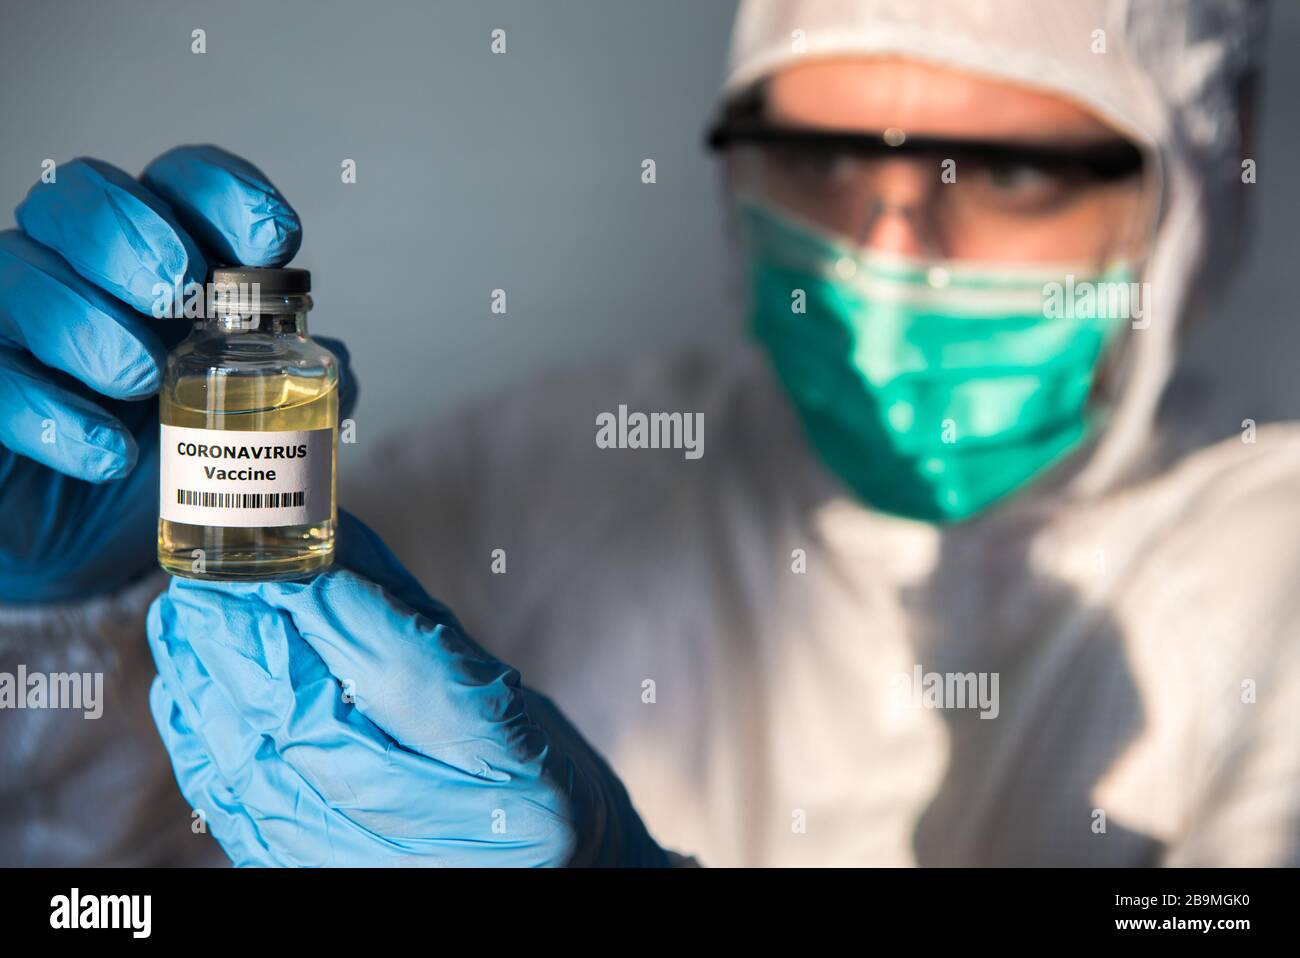 Male scientific with protective suit holds a vaccine for coronavirus. Caucasian man with vaccination for COVID-19. 2019-nCoV found in Wuhan China. Epi Stock Photo